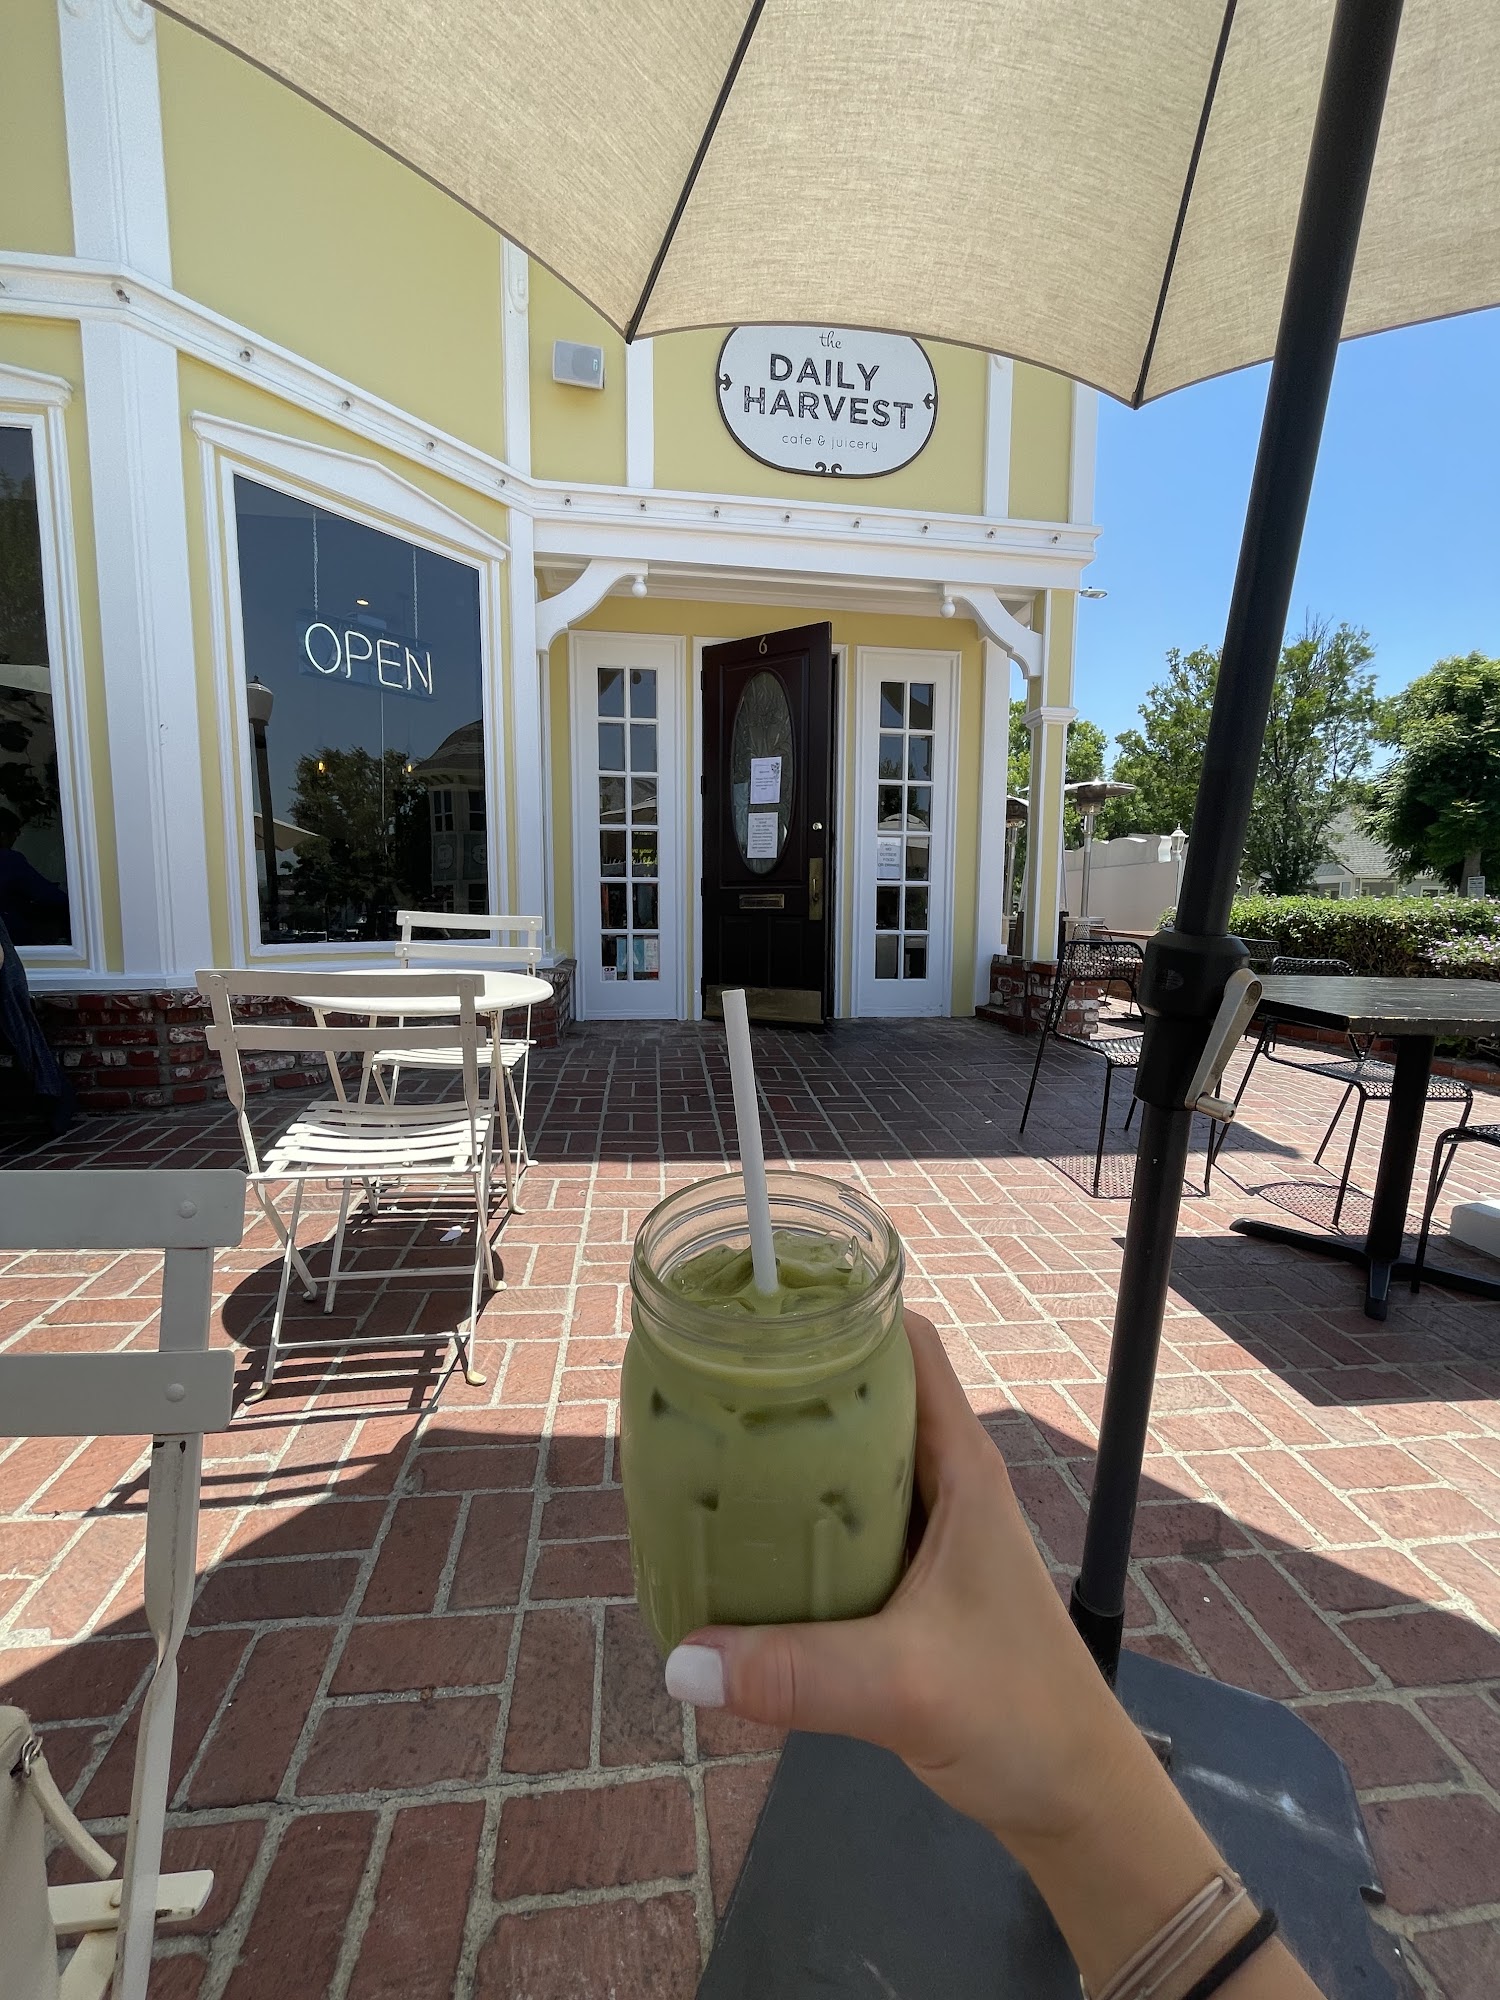 The Daily Harvest Cafe & Juicery